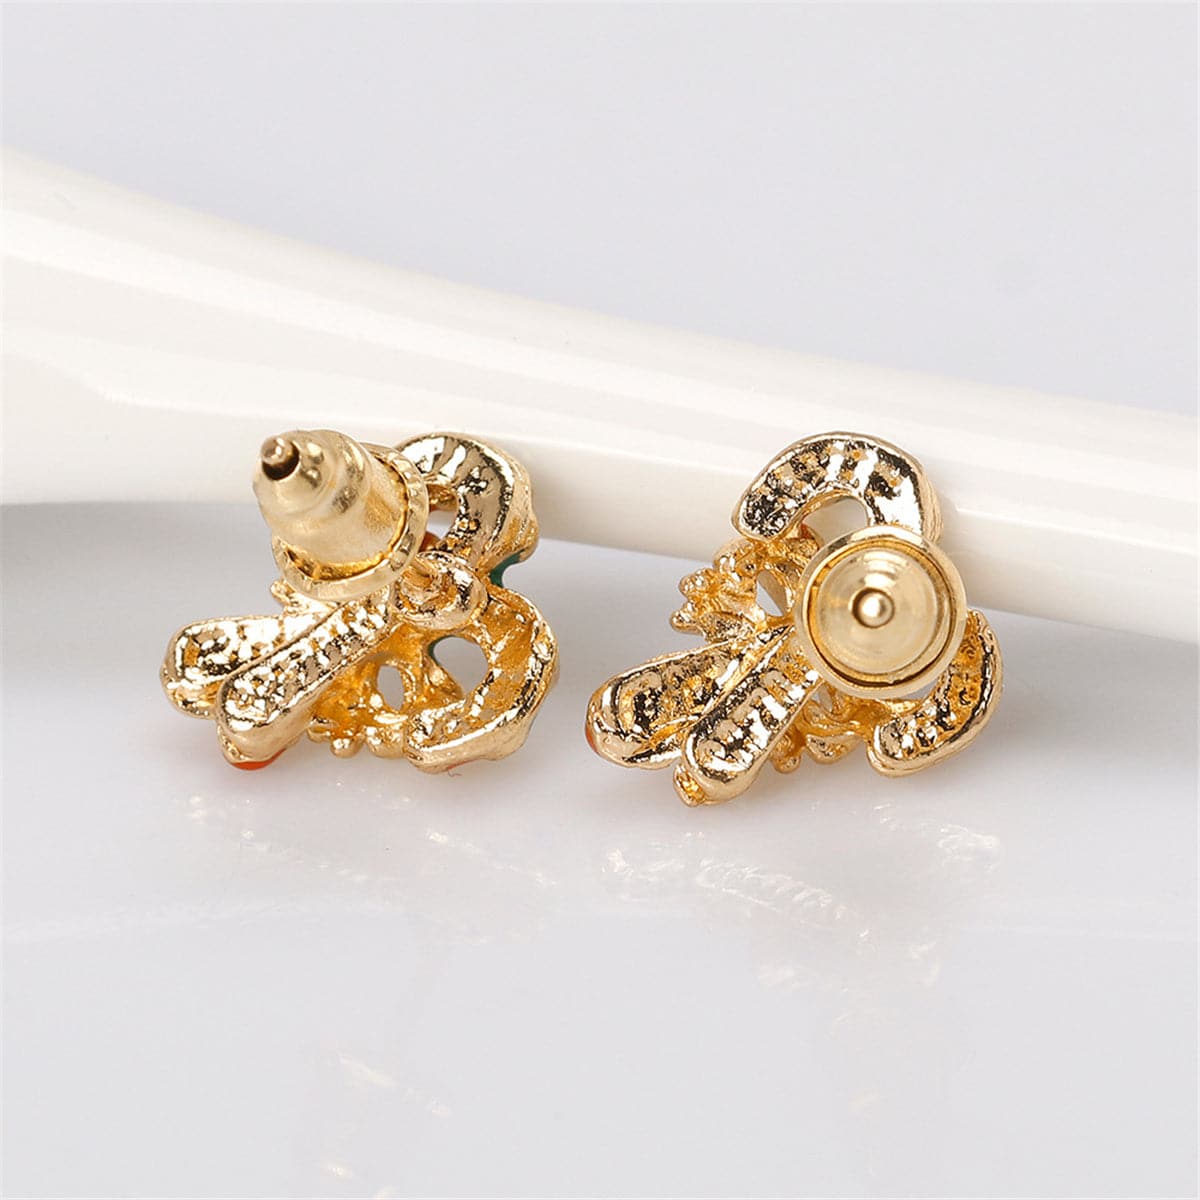 Red Enamel & 18K Gold-Plated Candy Cane Crutch Stud Earrings